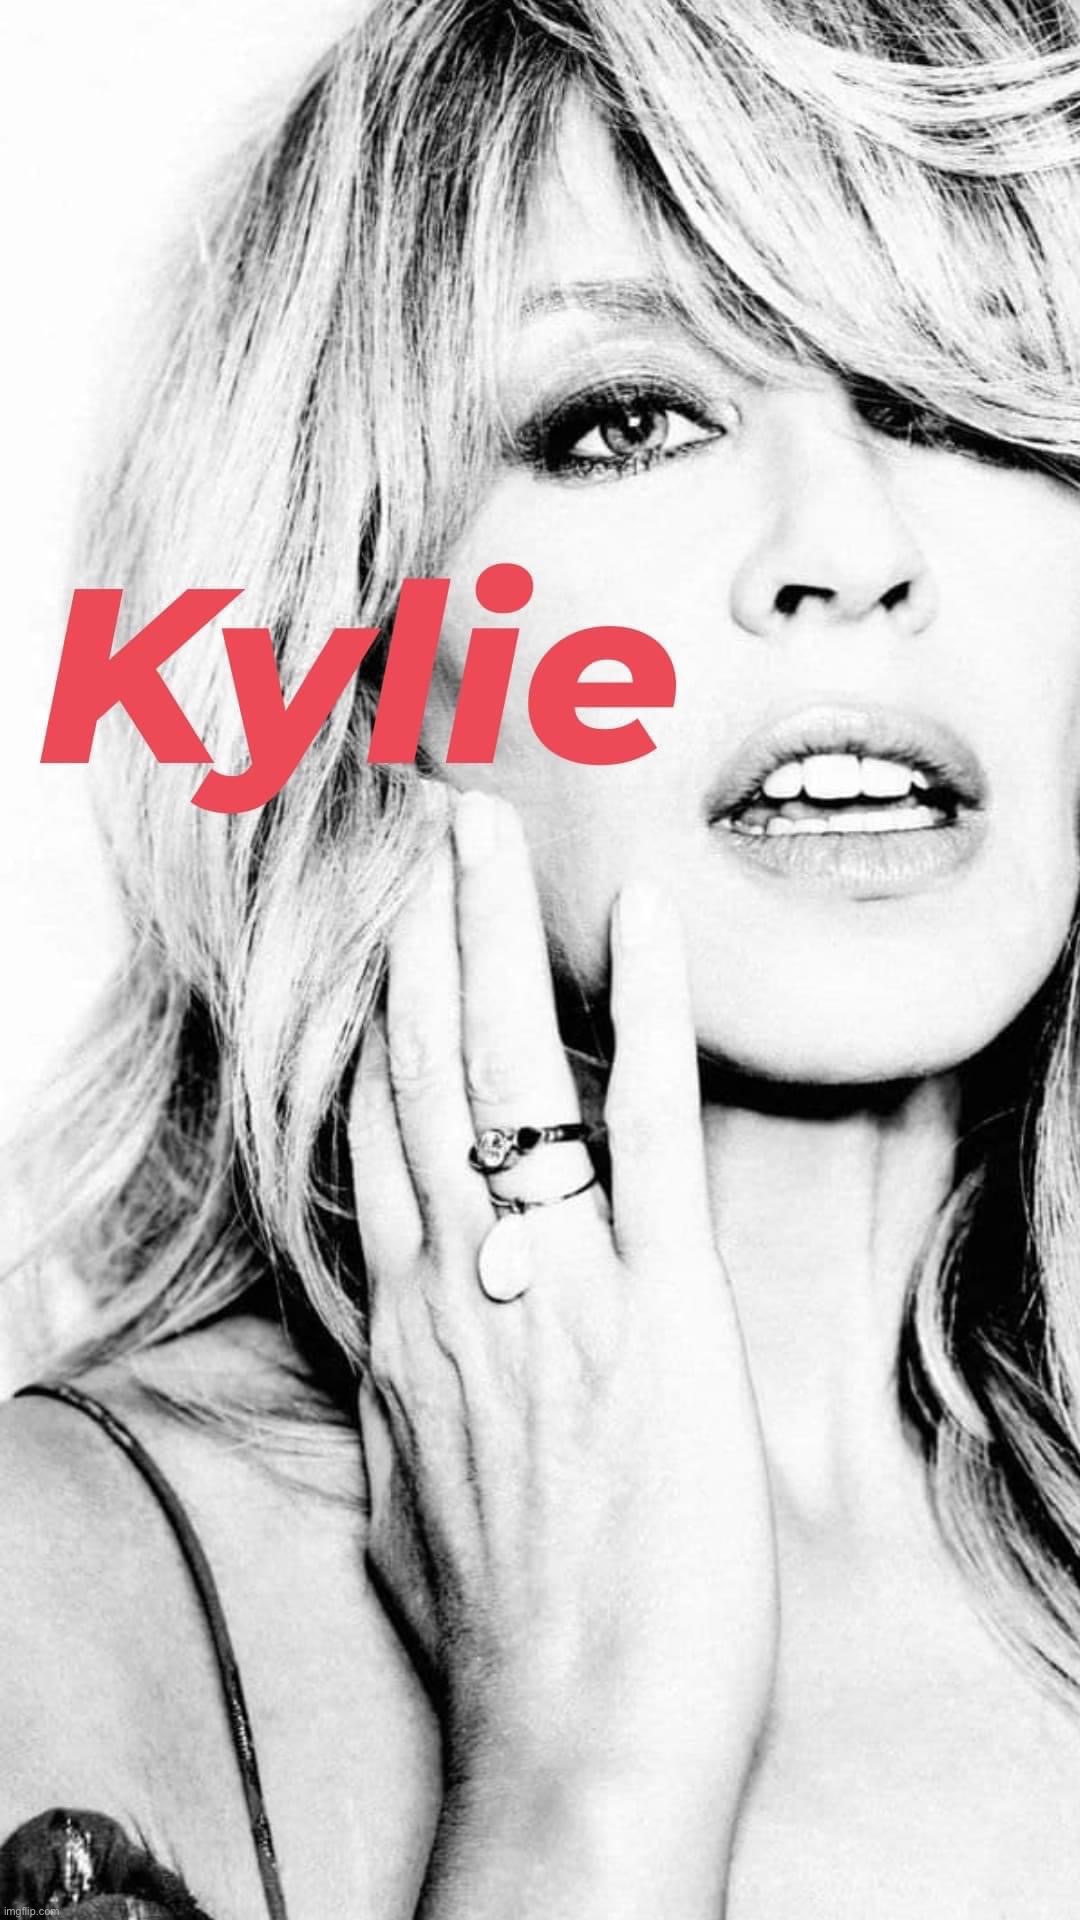 Kylie black & white | image tagged in kylie black white | made w/ Imgflip meme maker